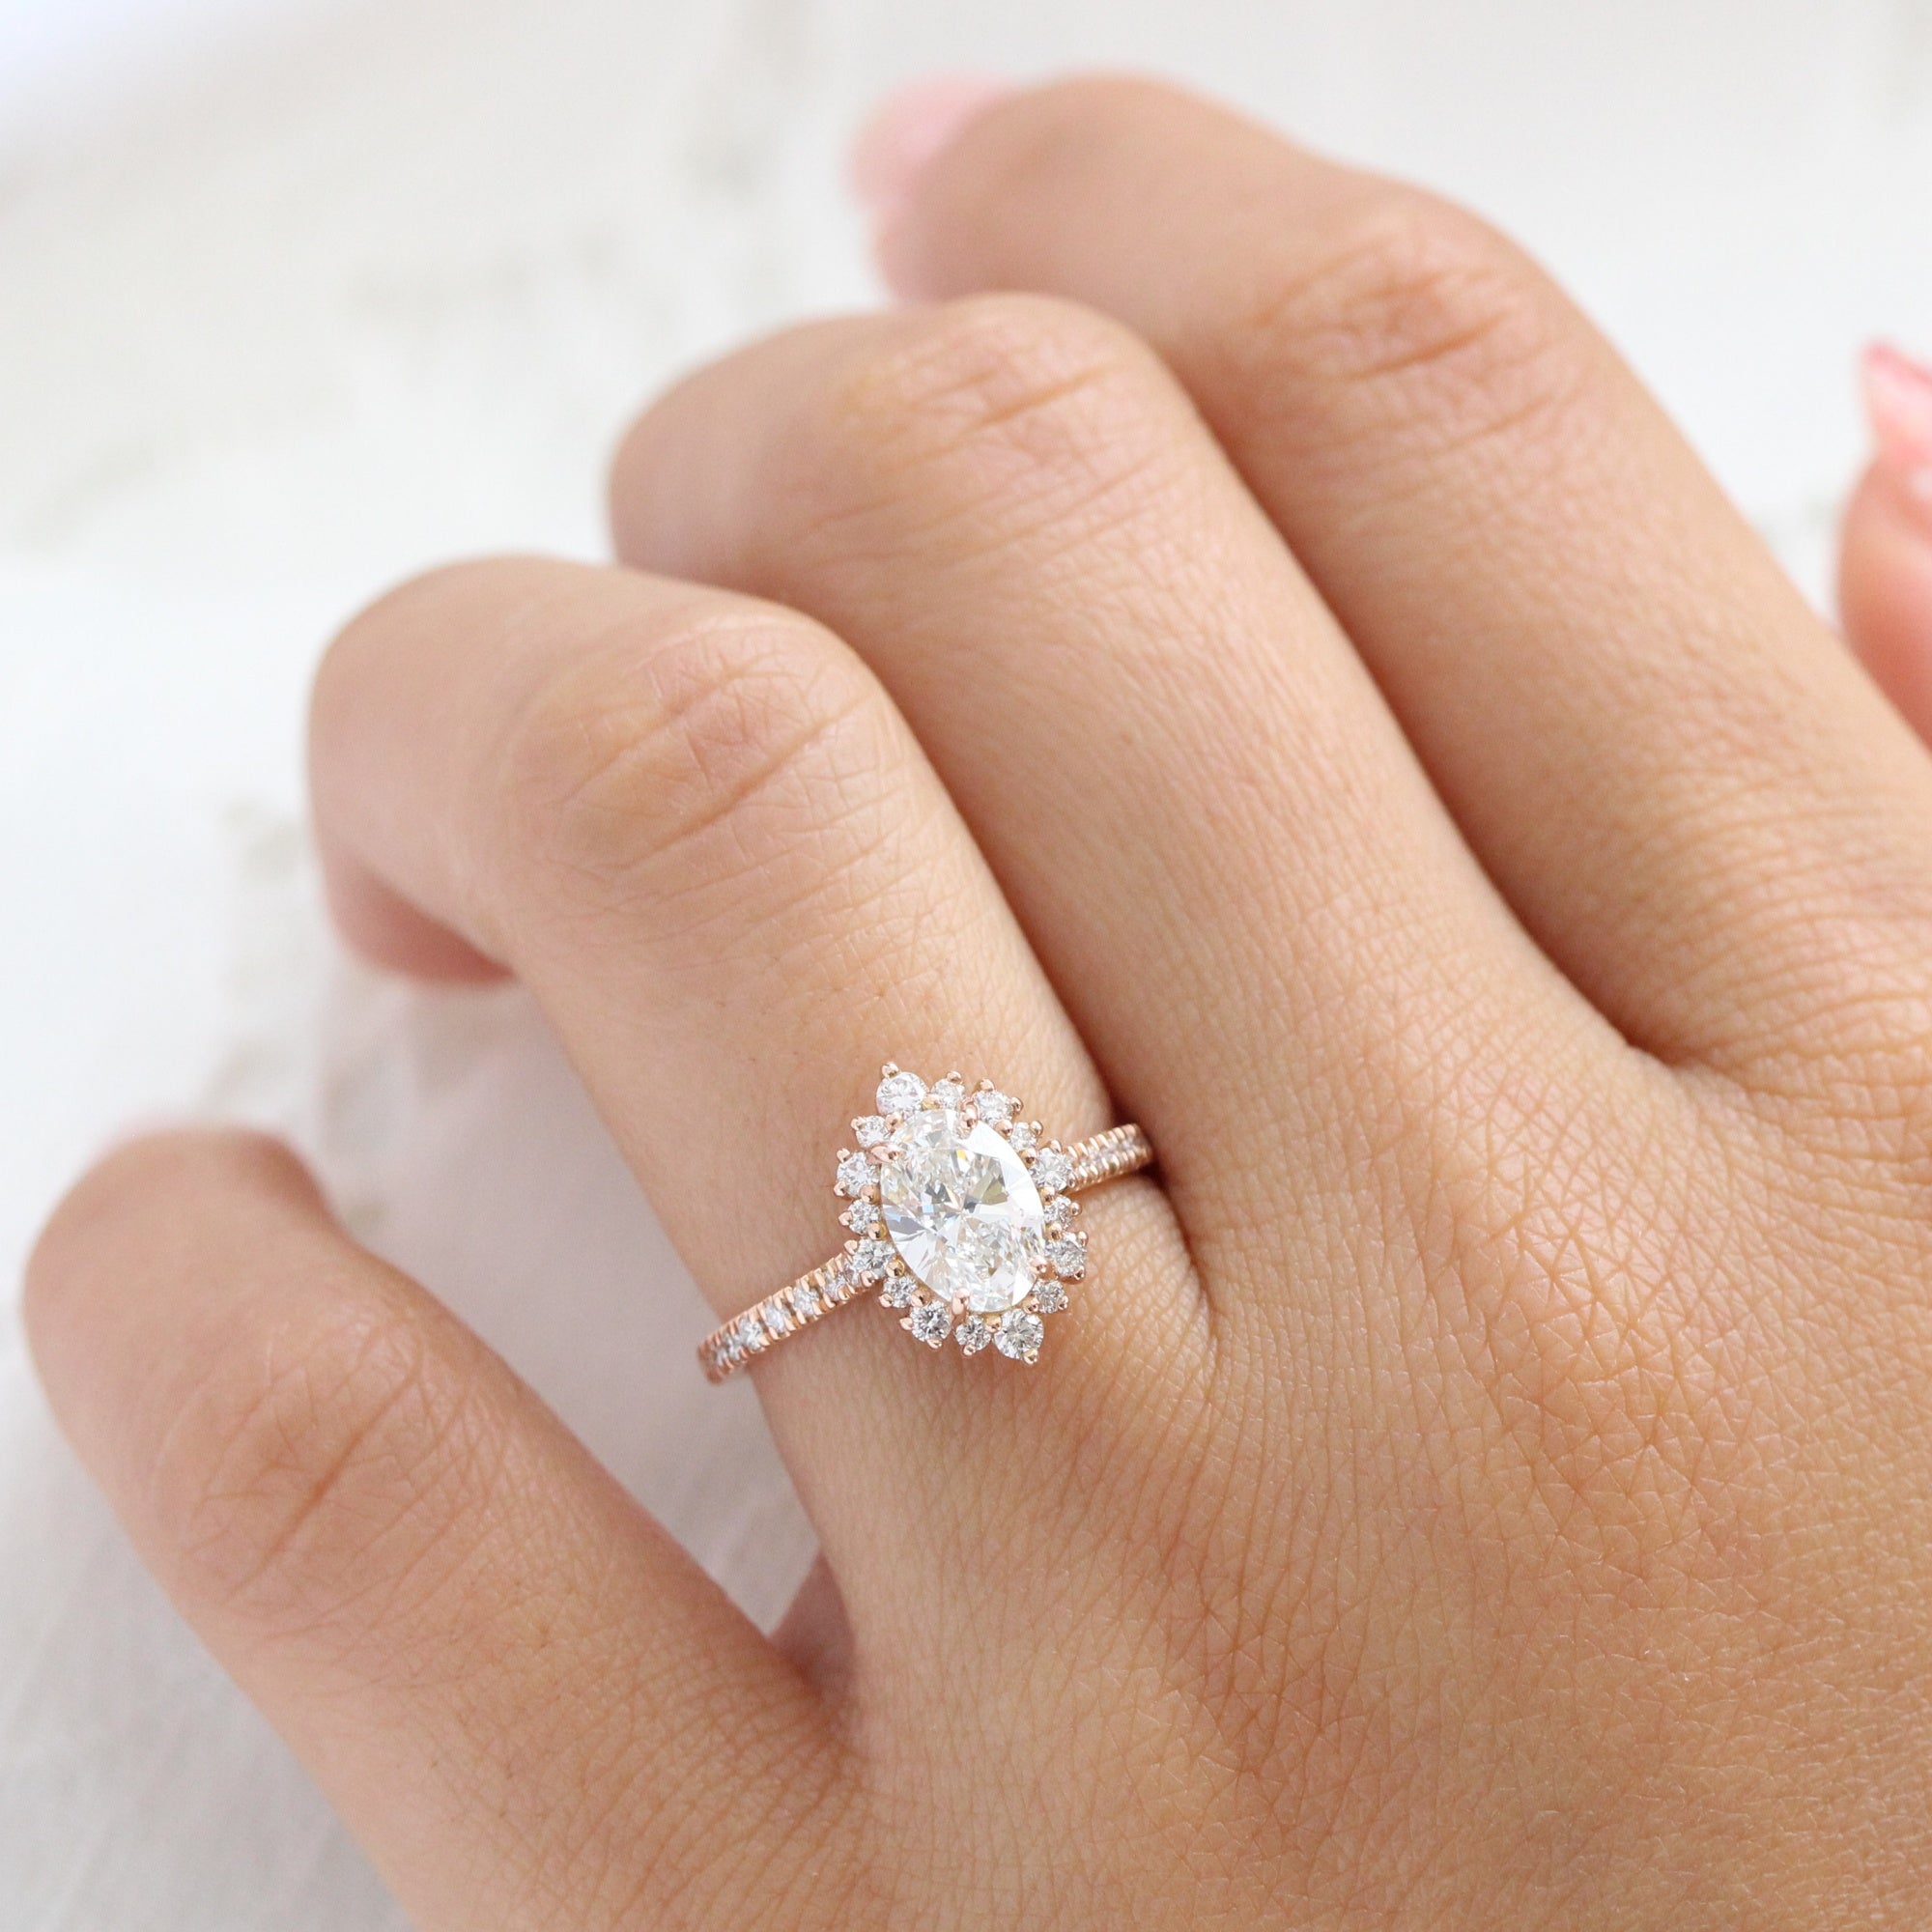 How Much Does A Custom Ring Setting Cost? - Diamonds Ltd